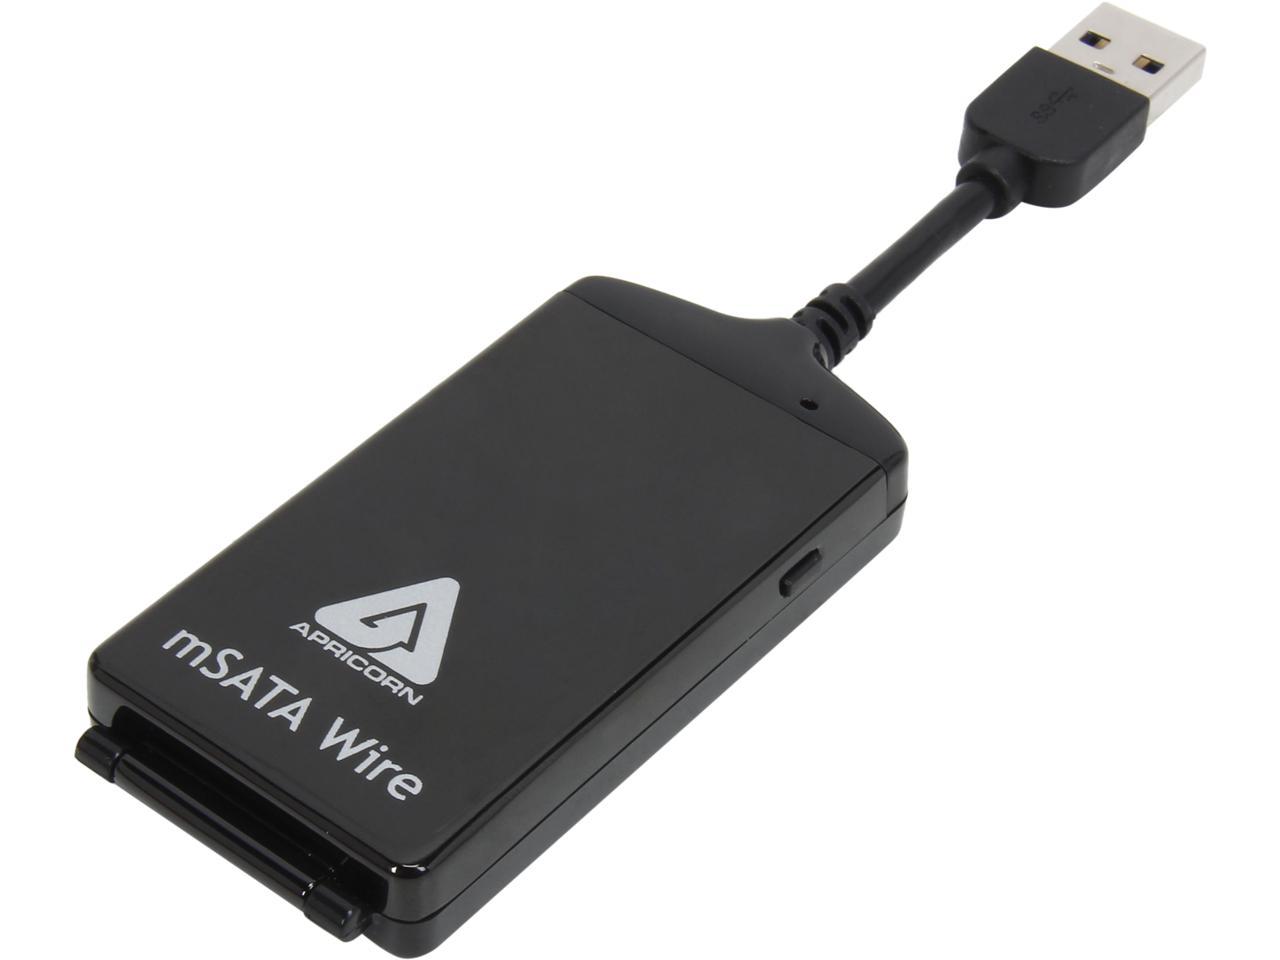 apricorn sata wire notebook hard drive upgrade kit with usb 3.0 connection asw-usb3-25 (grey)